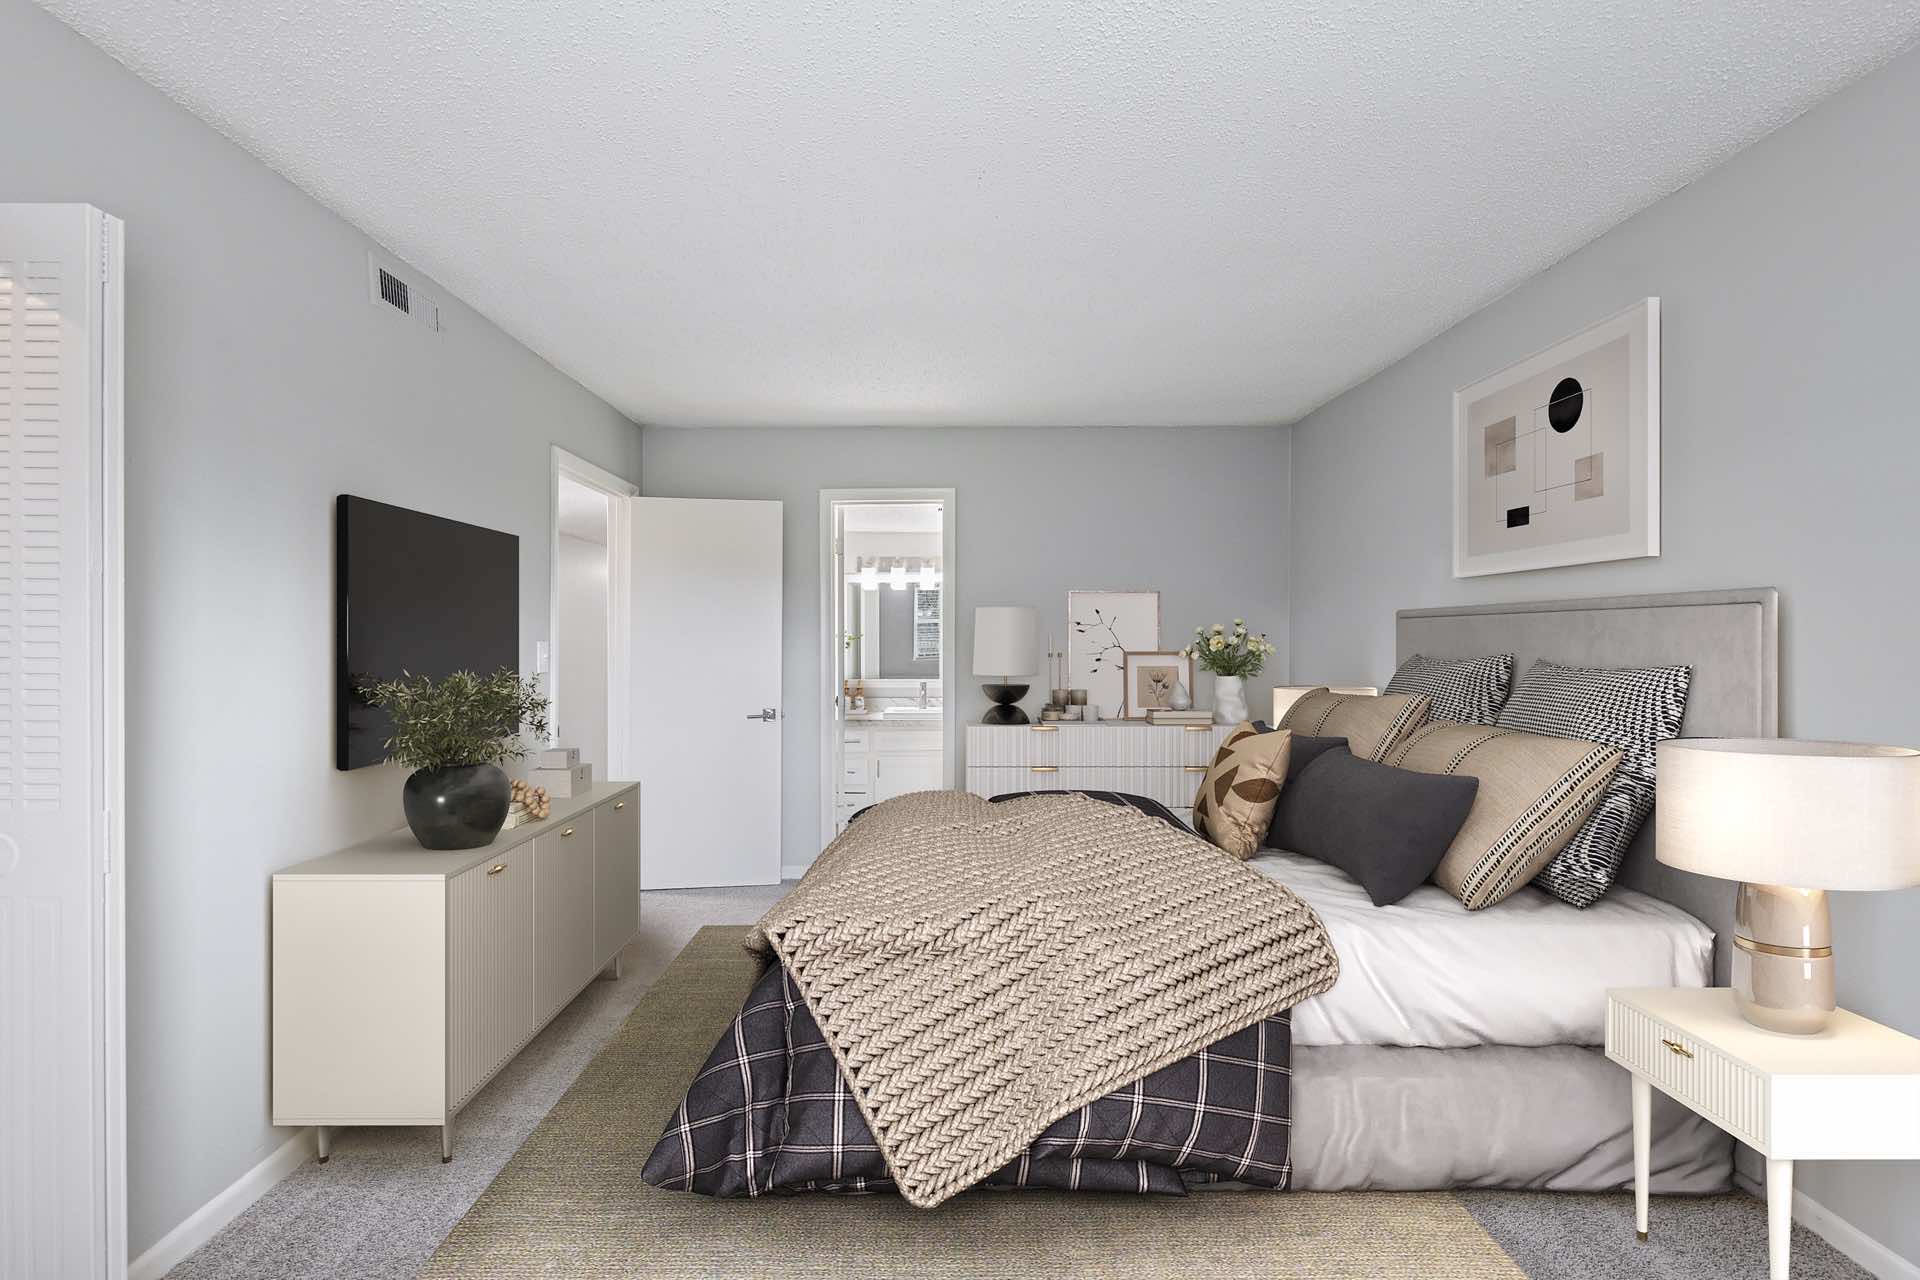 bedroom with natural lighting and plush carpeting leading to bathroom